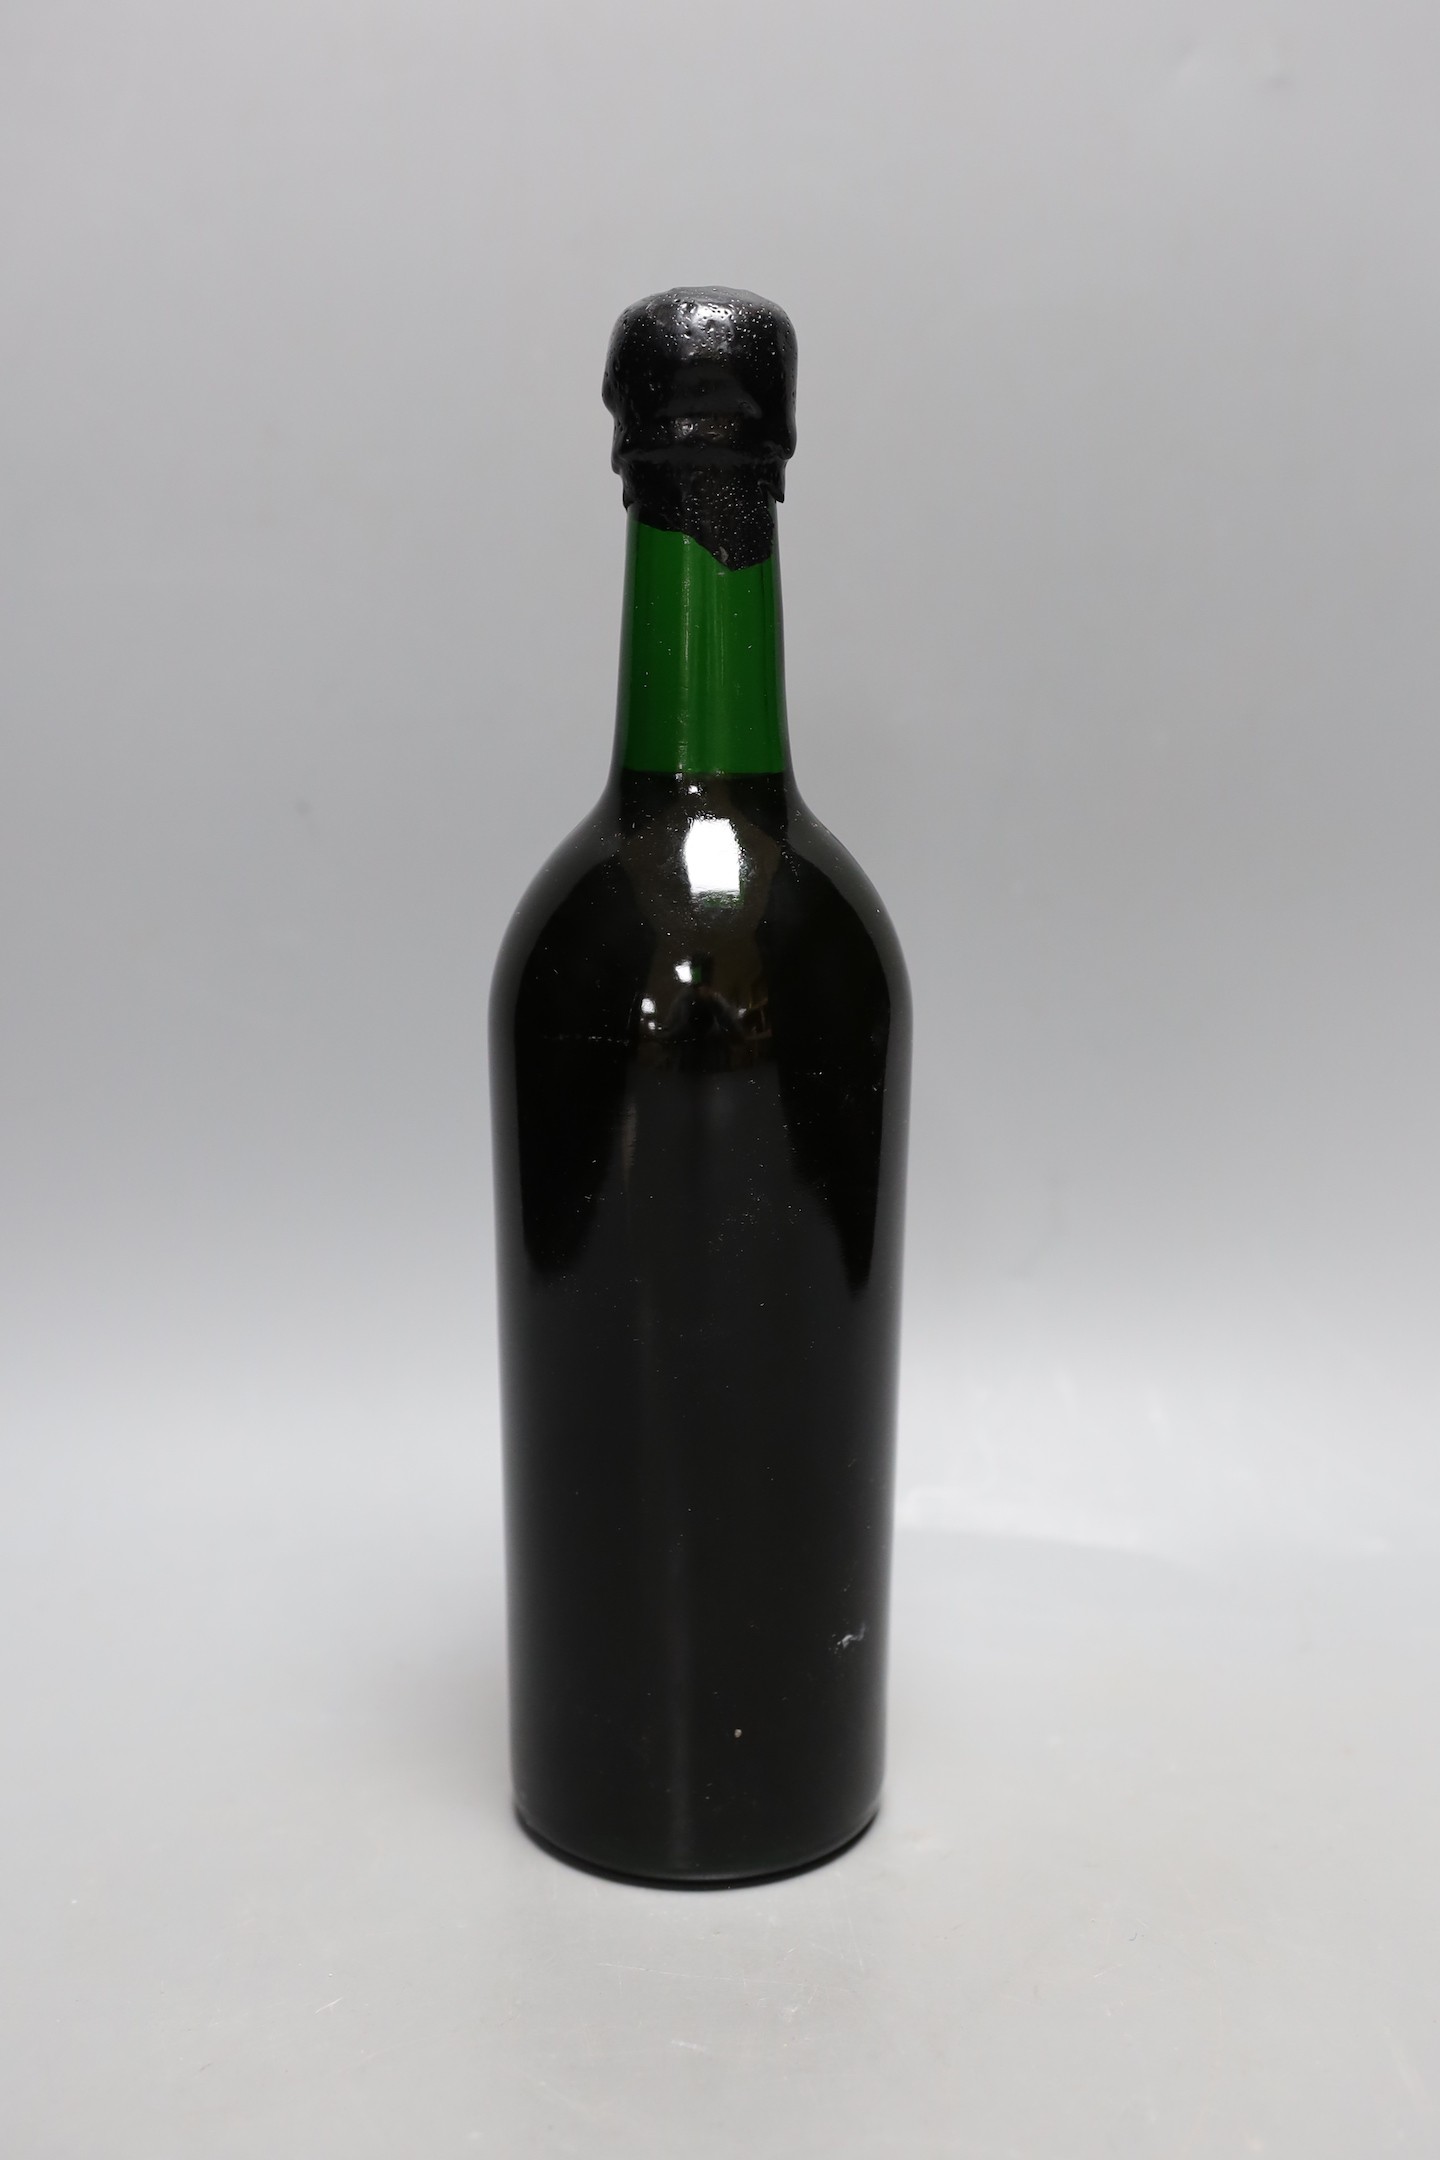 One bottle, believed to be Port, 1871